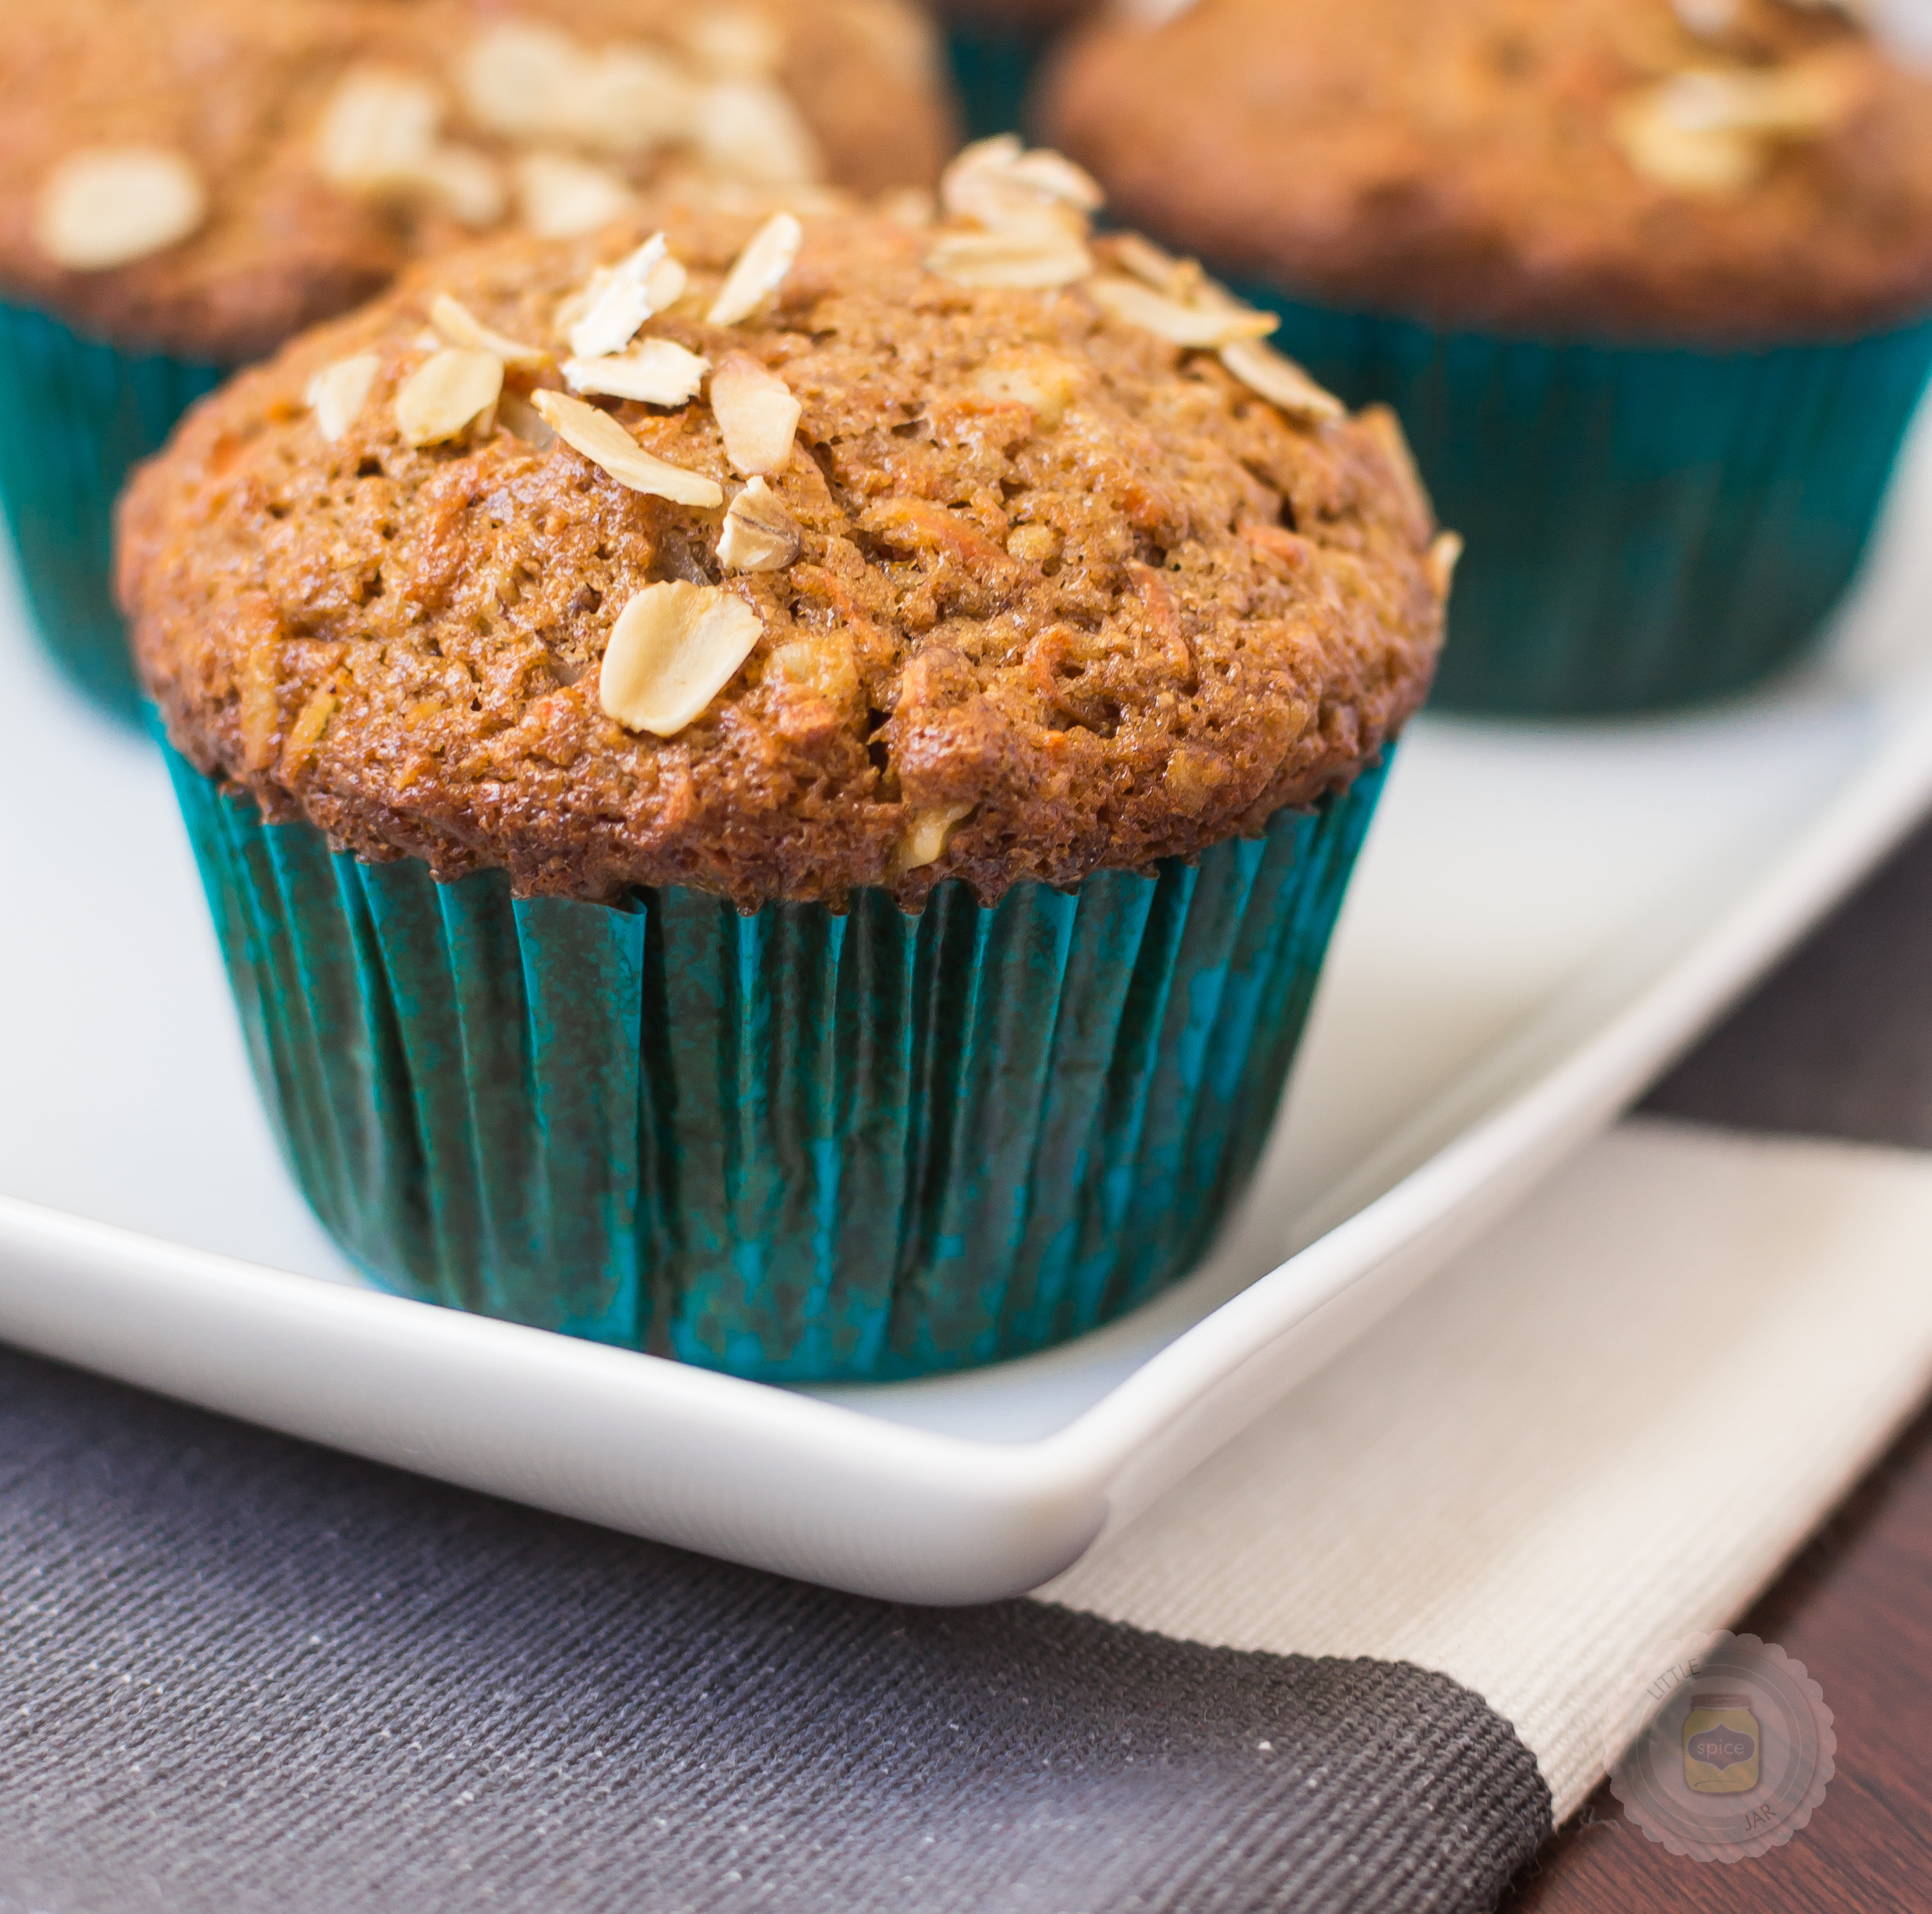 Healthy Carrot Cake Muffins
 SUPER MOIST AND HEALTHY CARROT CAKE MUFFINS